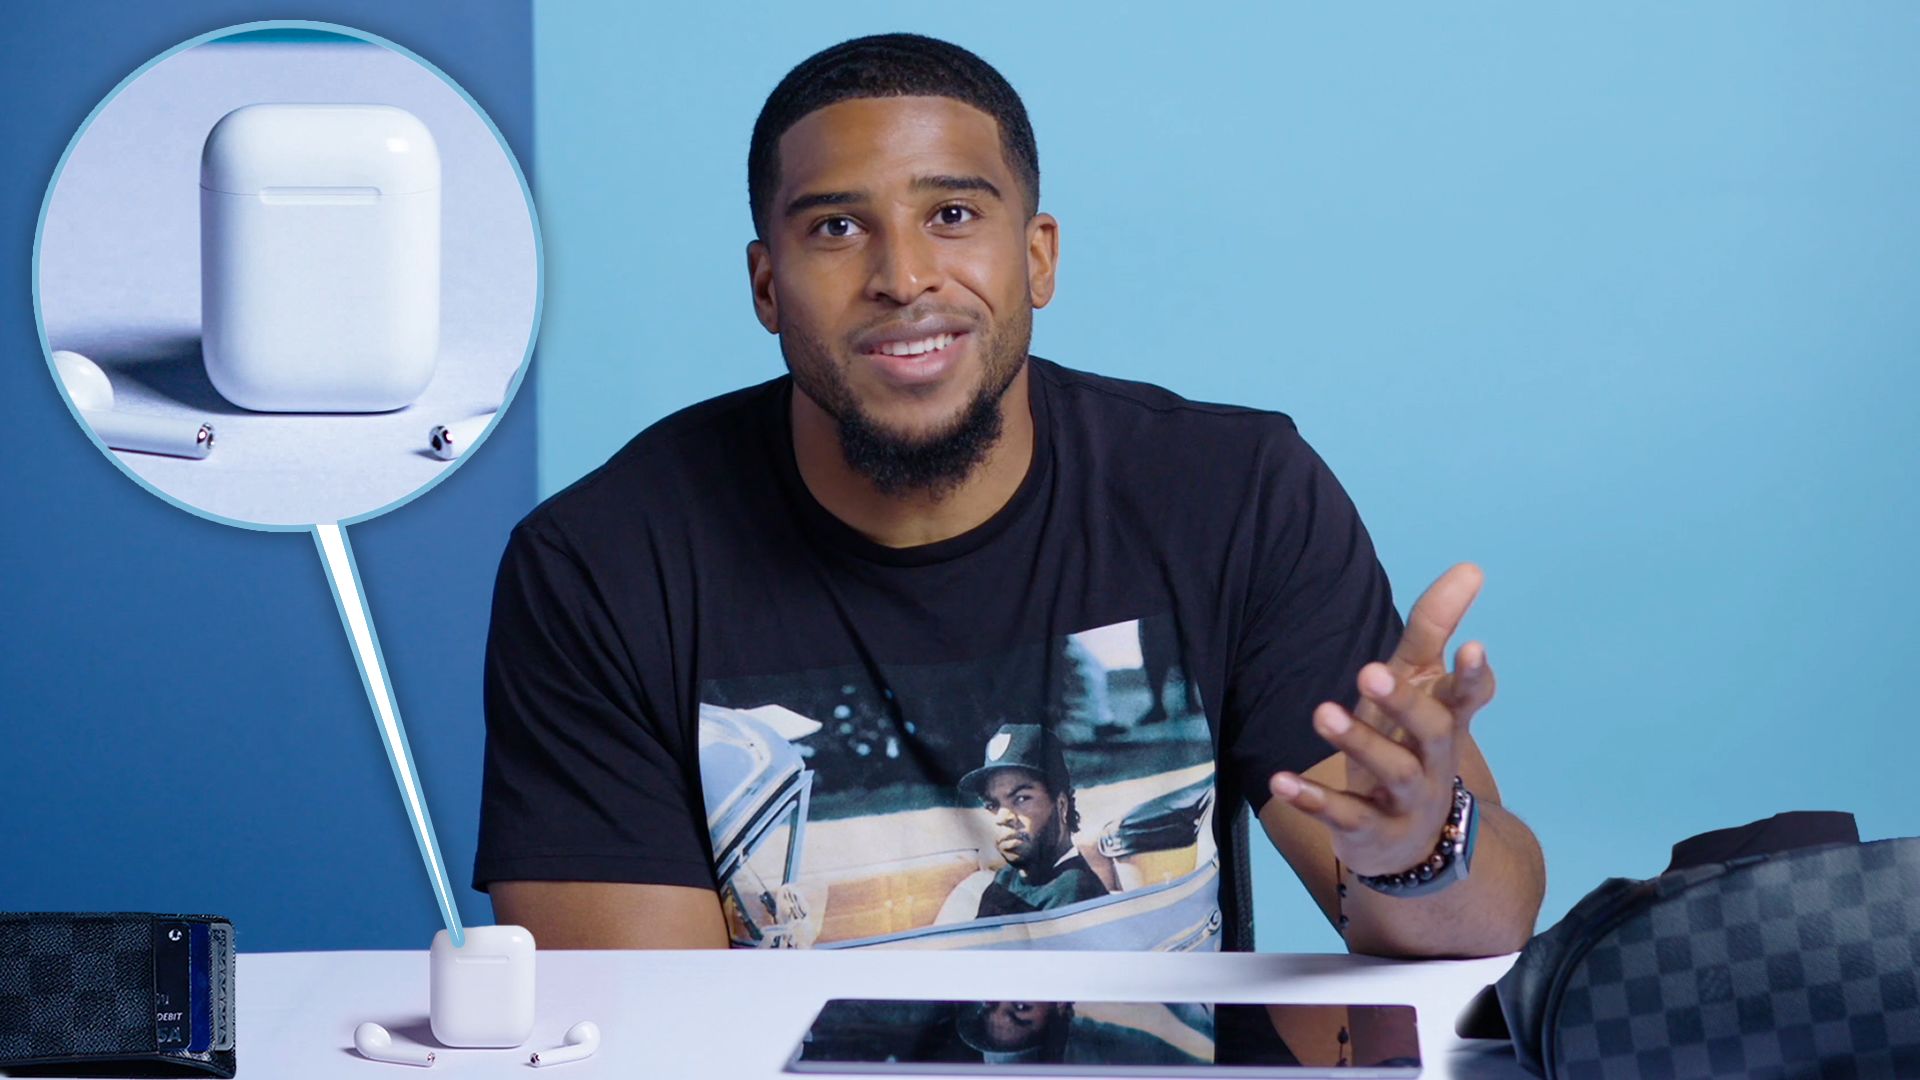 Watch 10 Things Bobby Wagner Can't Live Without, 10 Essentials